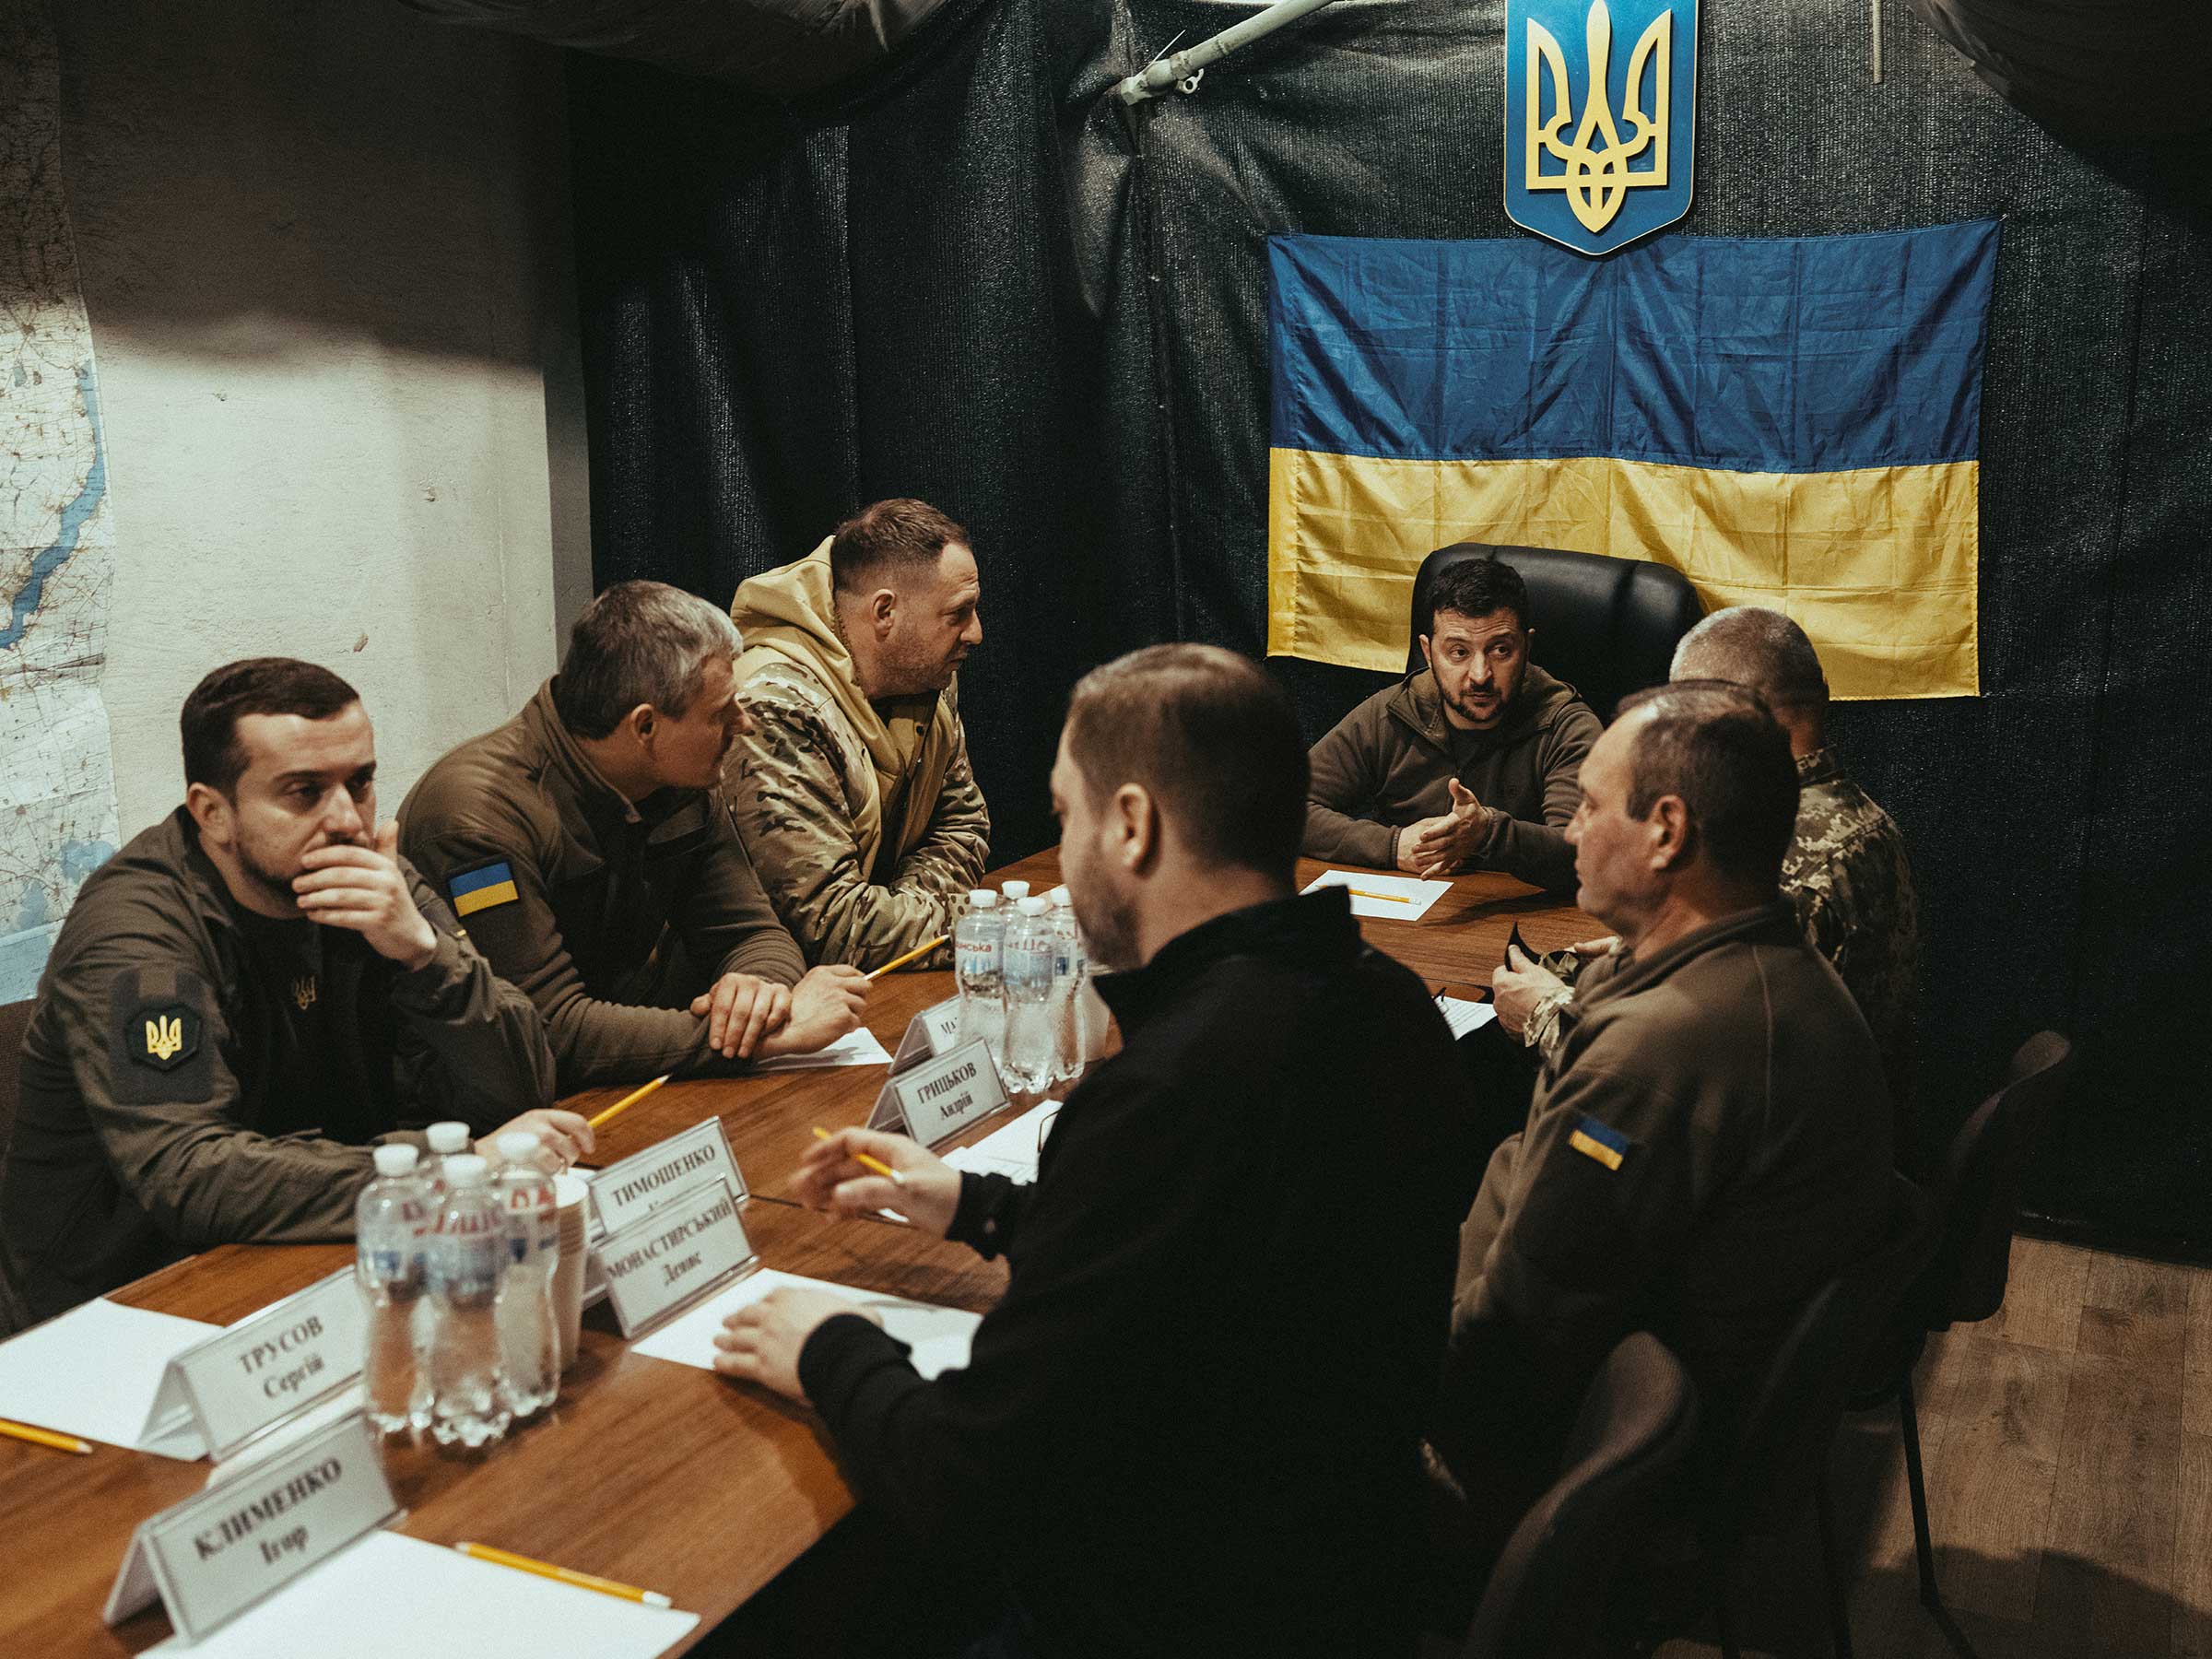 The President meets with military advisers in a hidden bomb-proof bunker near the front lines in Kherson on Nov. 14. (Maxim Dondyuk for TIME)